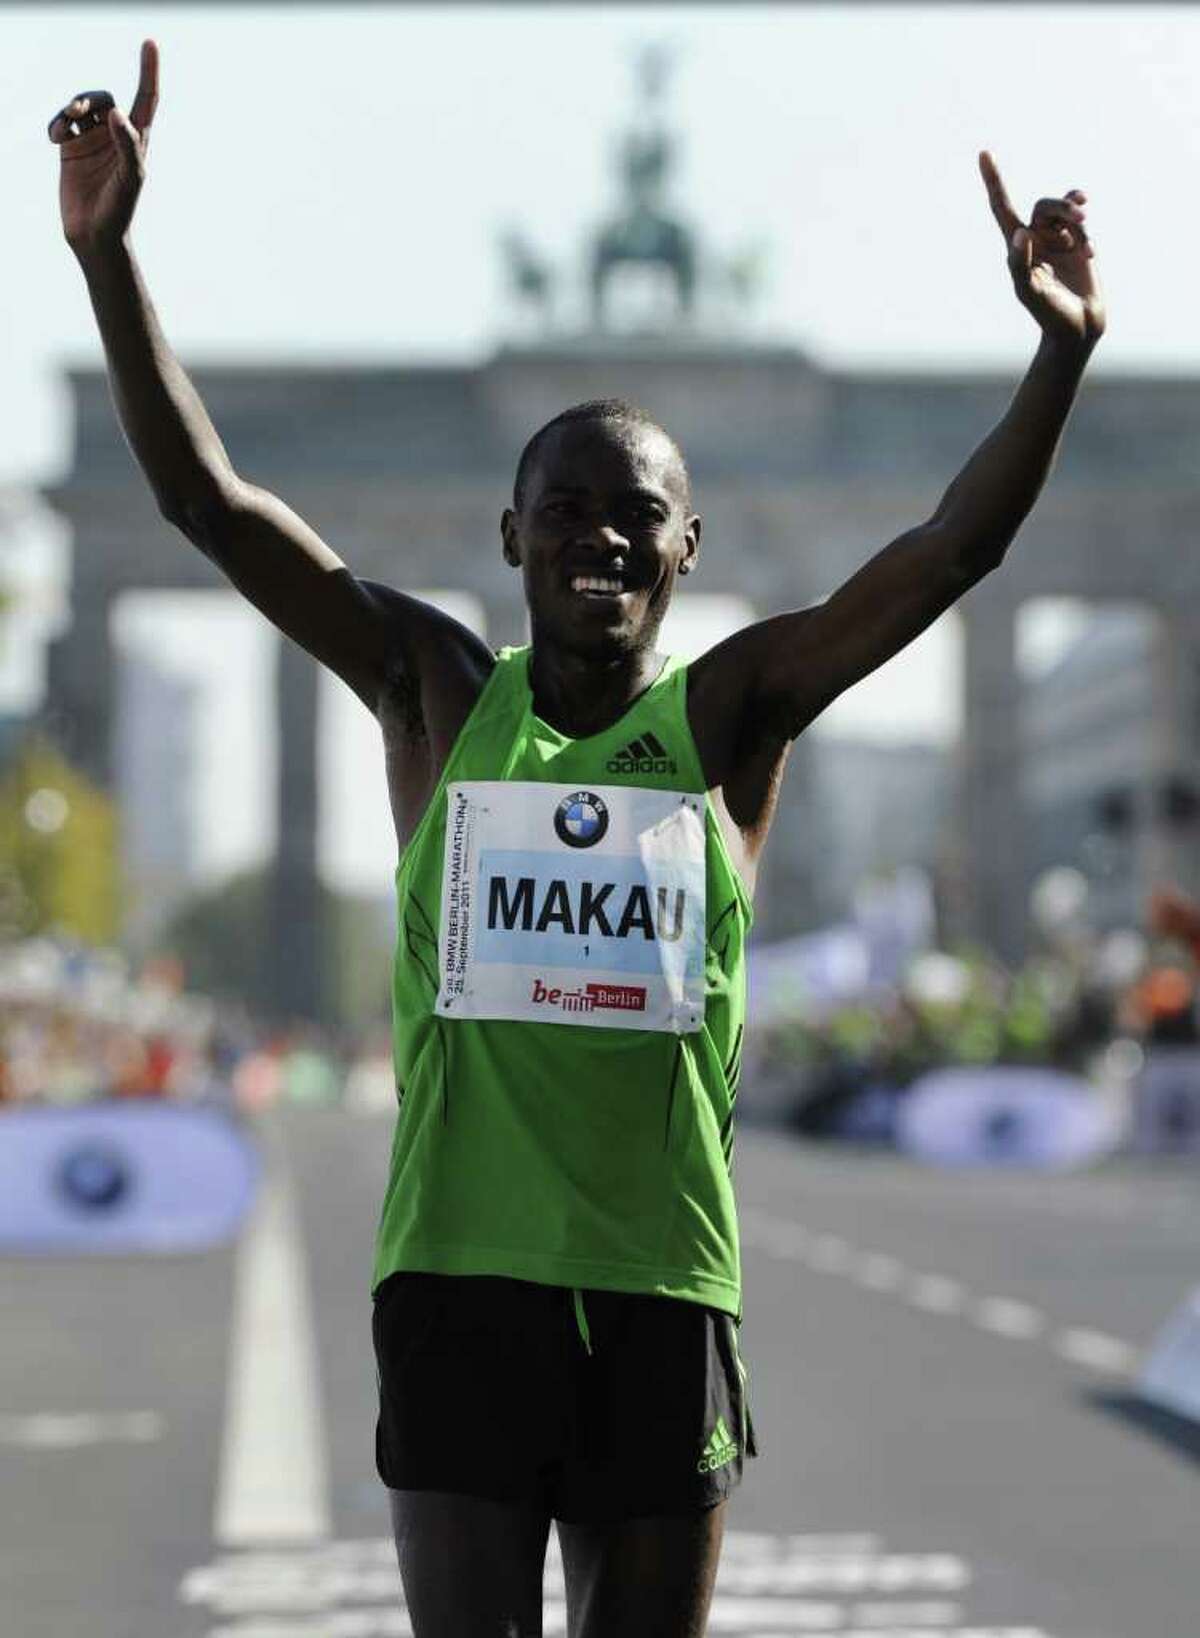 Patrick Makau of Kenya celebrates after winning the 38th Berlin Marathon on September 25, 2011 in Berlin. He set a new world record in an official time of 2hr 03min 38sec. AFP PHOTO ODD ANDERSEN (Photo credit should read ODD ANDERSEN/AFP/Getty Images)